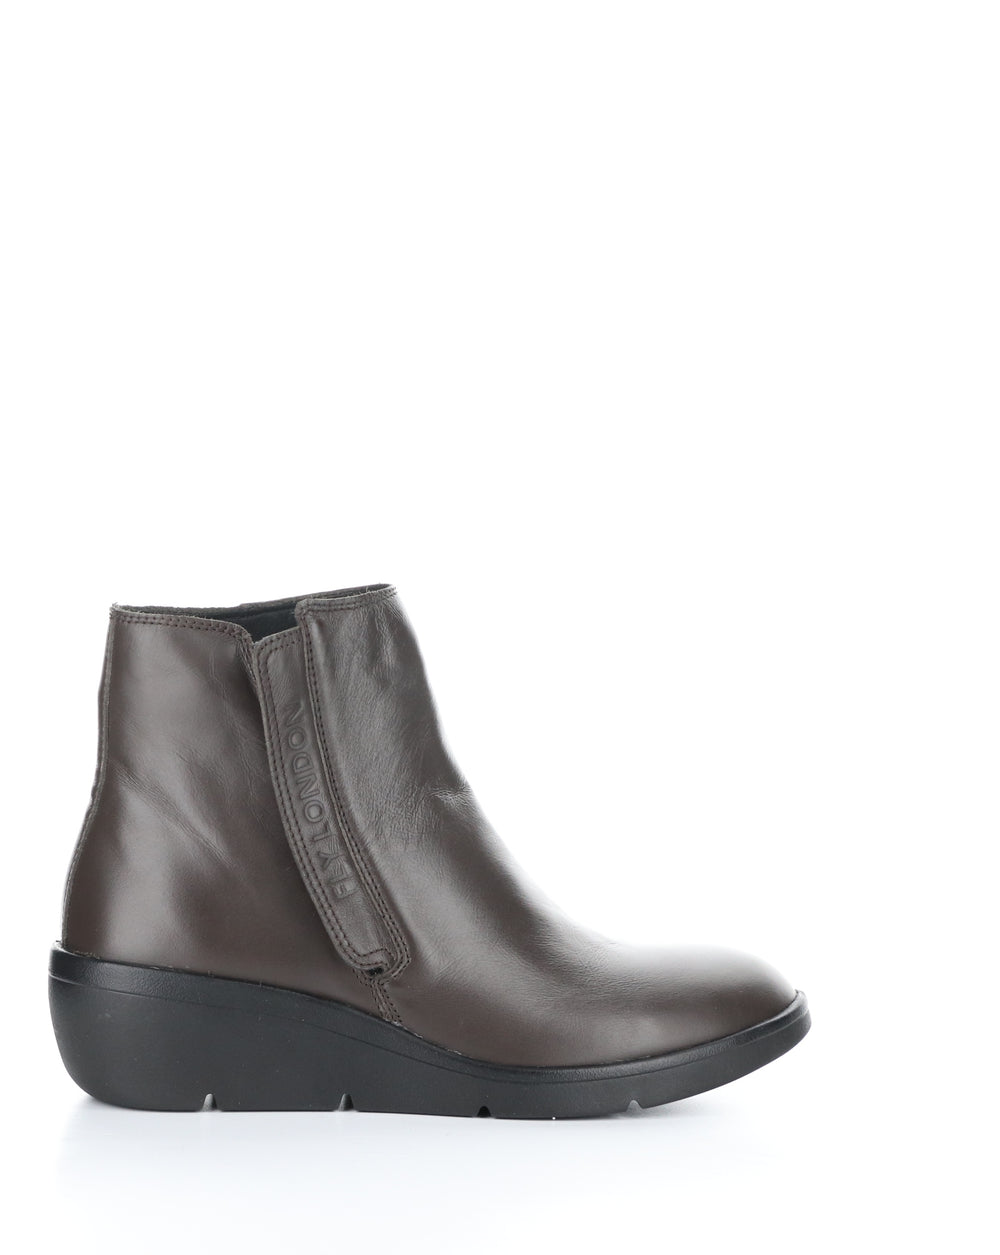 NULA550FLY 007 BROWN Round Toe Boots